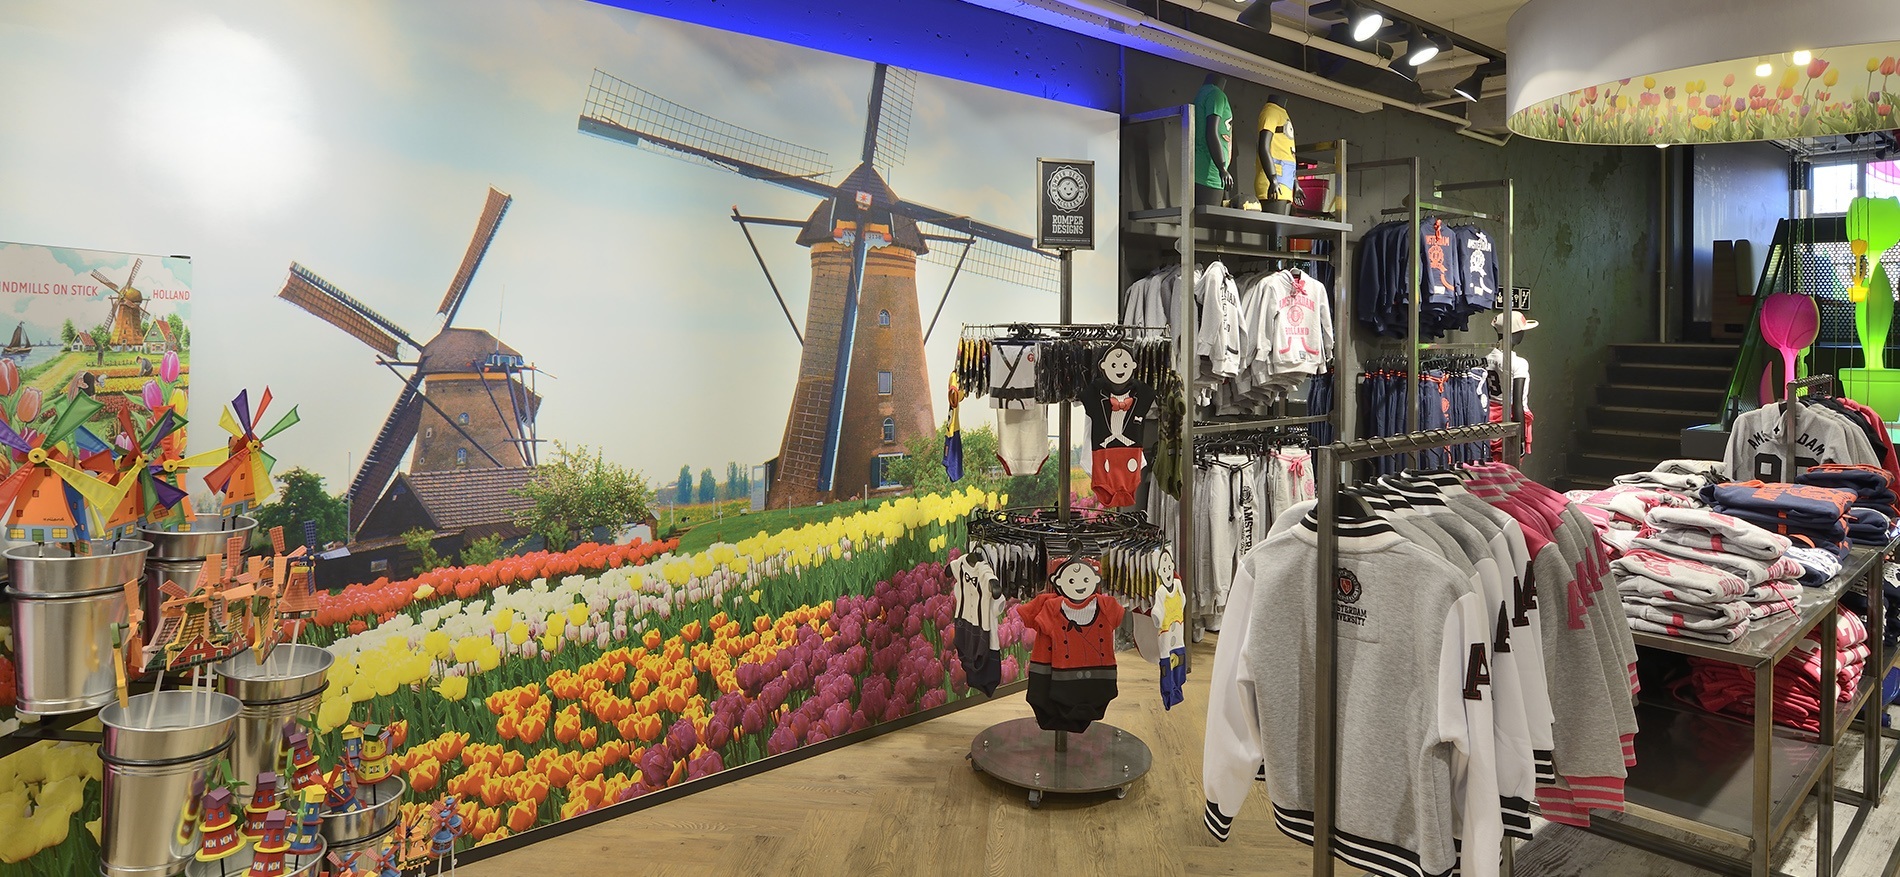 Shopping experience for Amsterdam Designs – Tourist shop - 